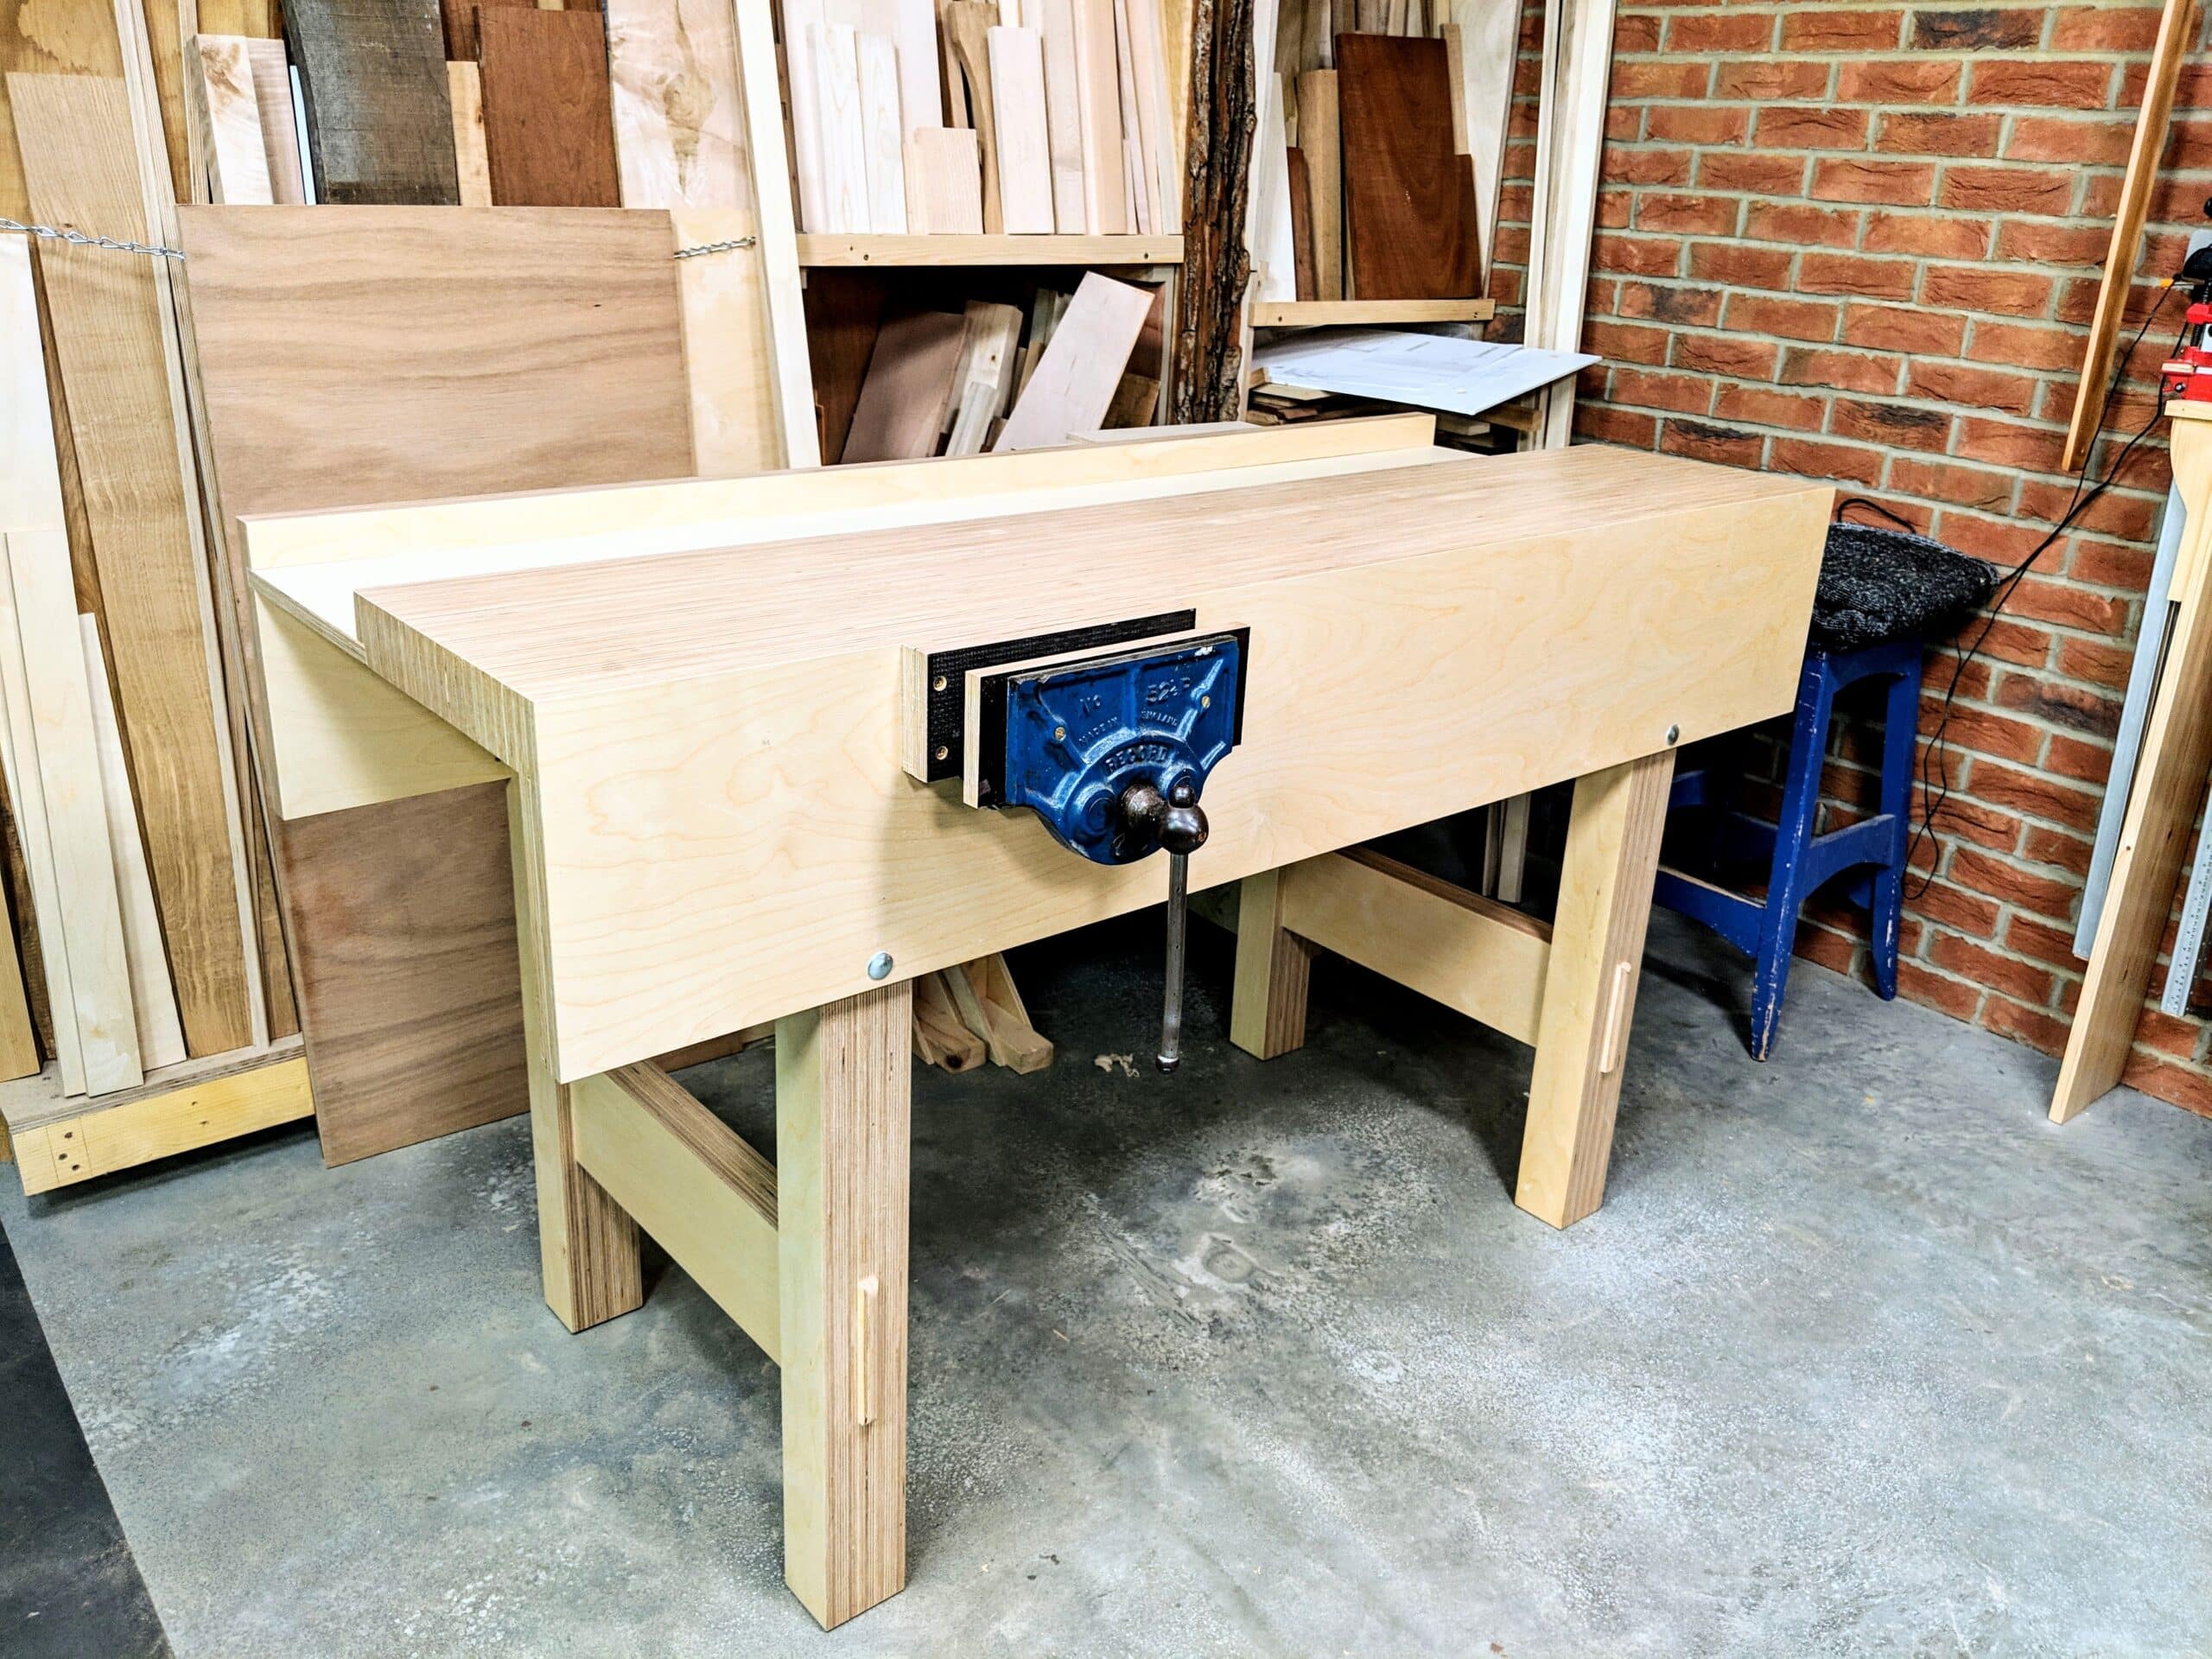 Workbench and Vise—Two Core Essentials to Real Woodworking - Paul Sellers'  Blog